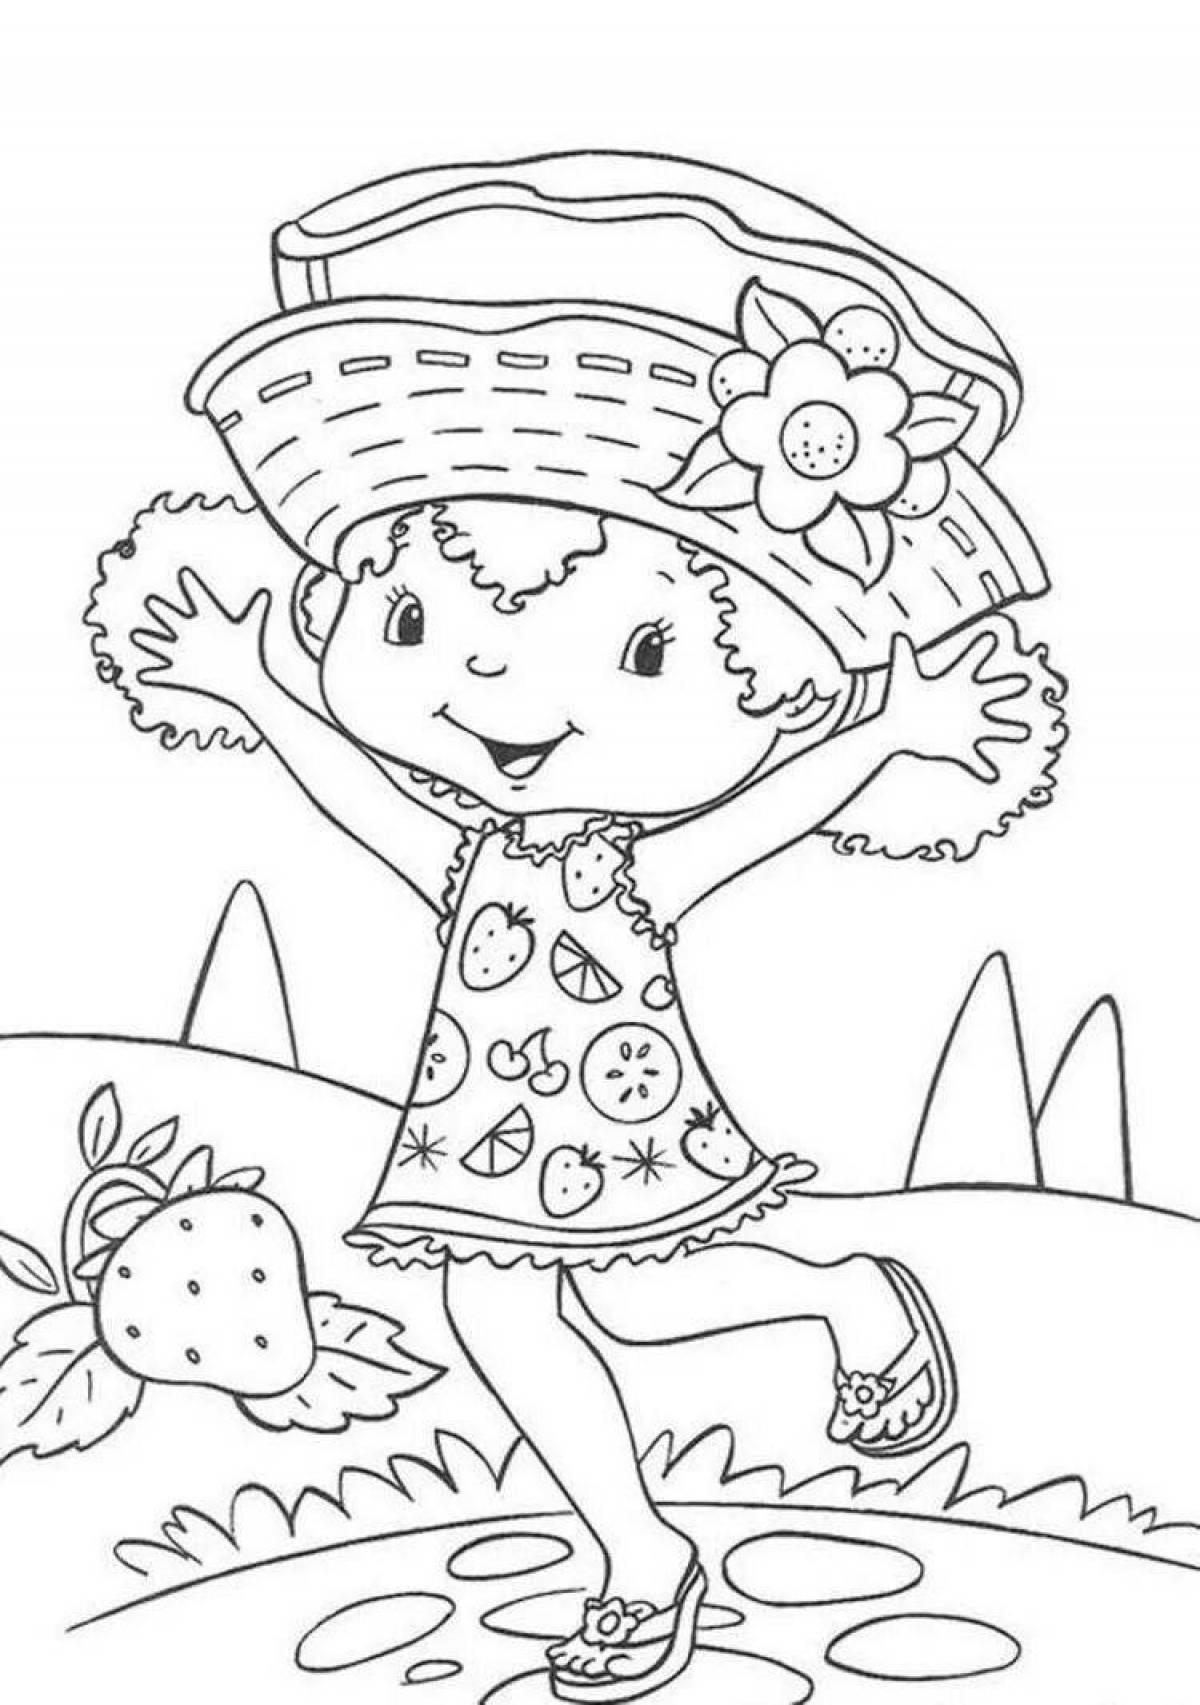 Fairytale coloring book for girls strawberry